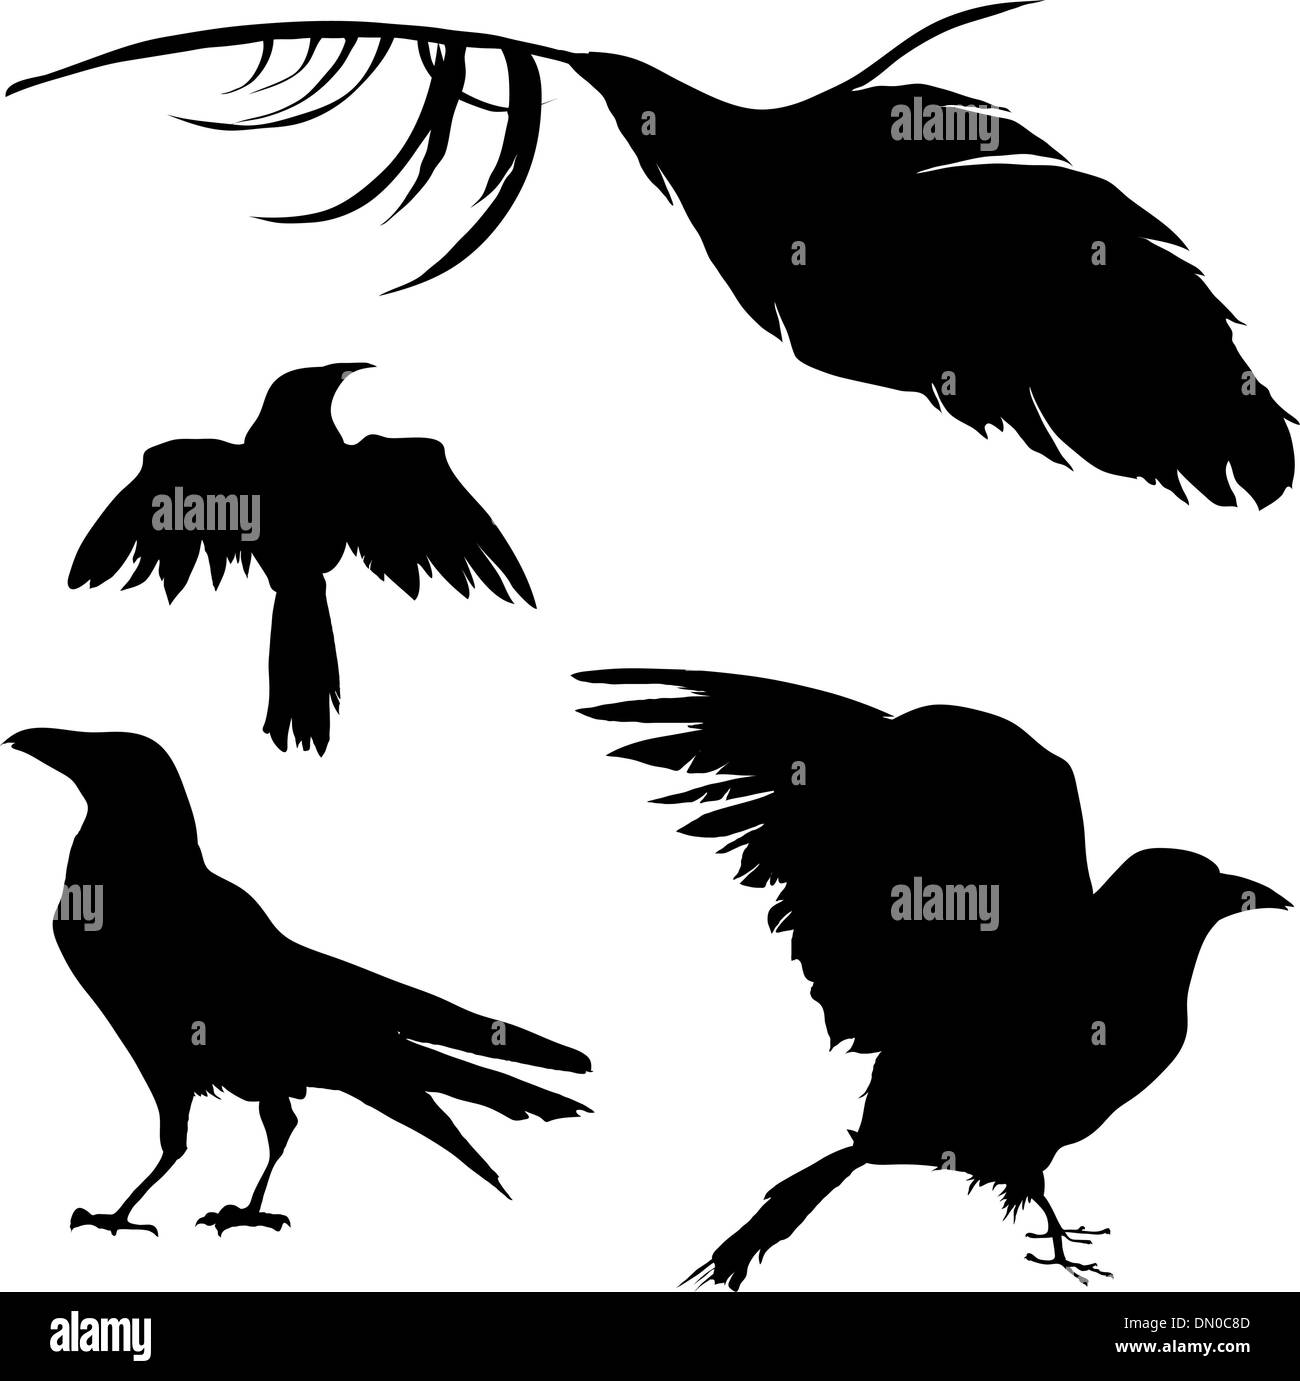 Crows and ravens vector silhouettes Stock Vector